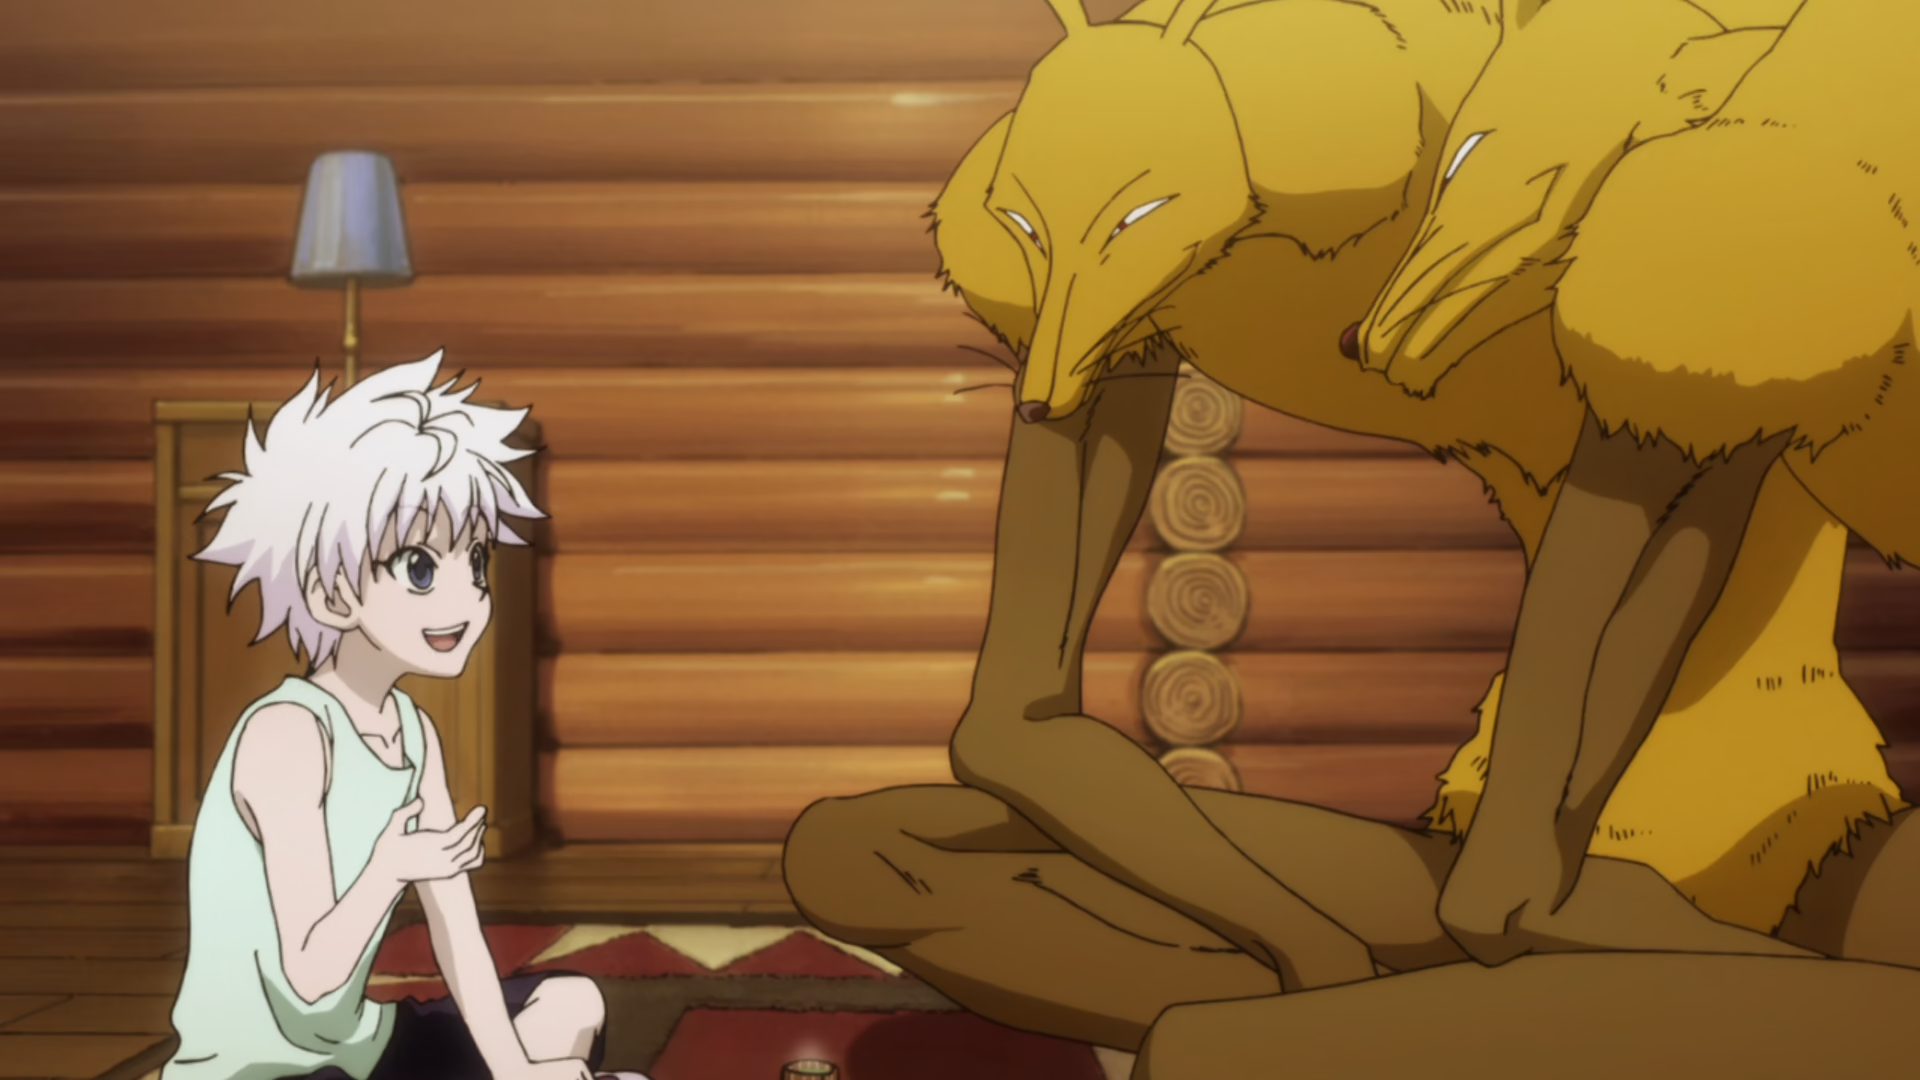 Hunter X Hunter 2011 Gon Killua Kite How to resolve a fight for who will  fight firstrock paper scissors of course